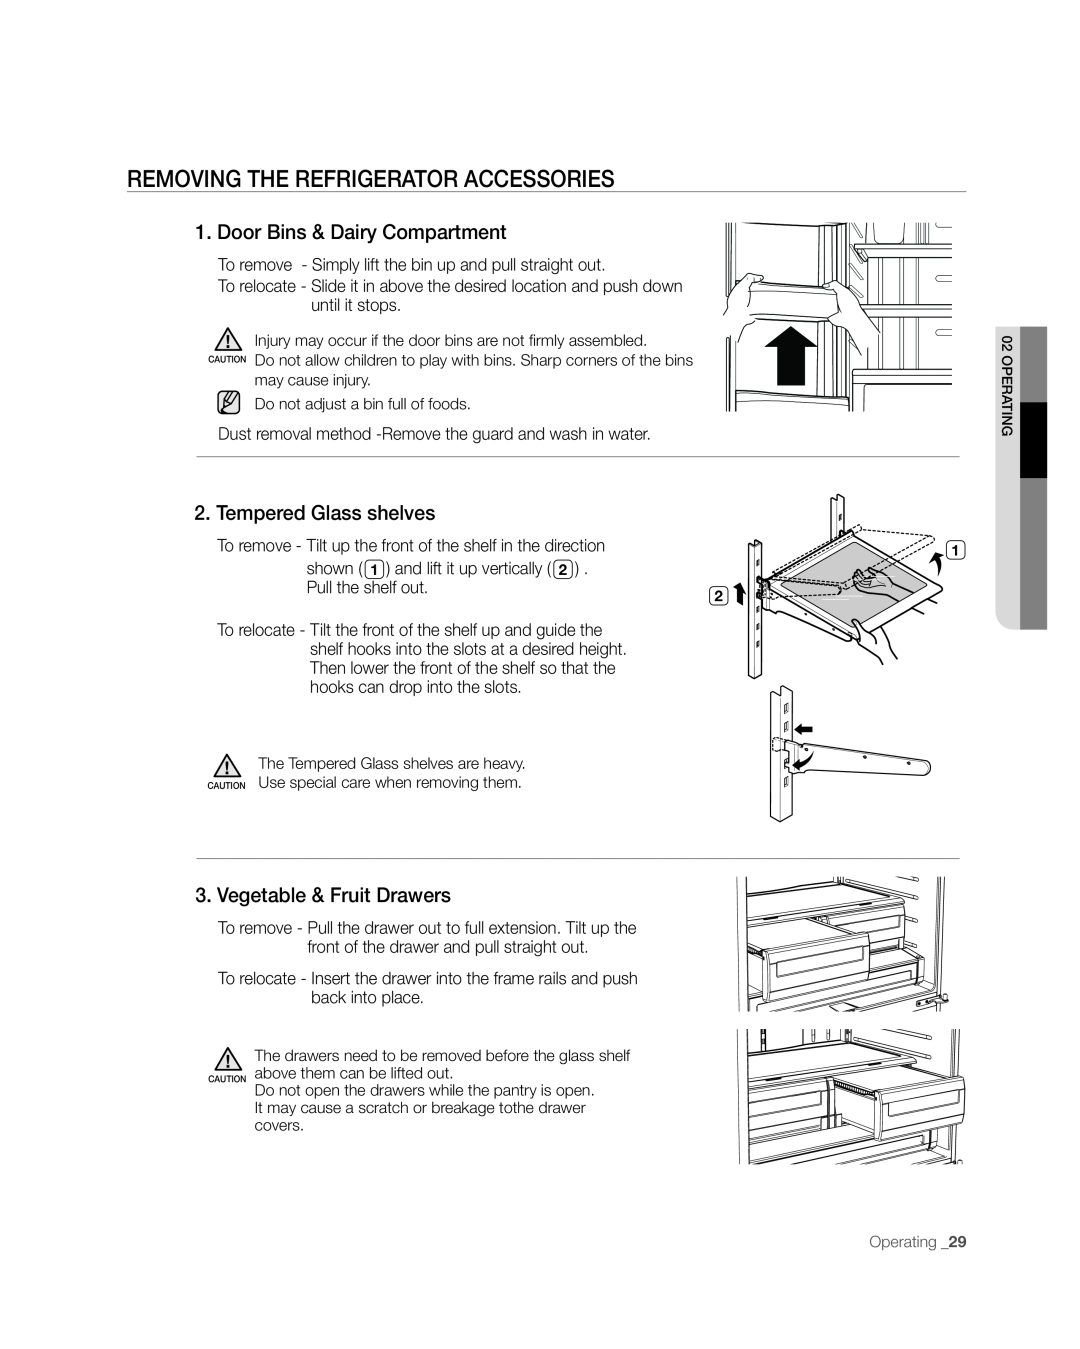 Samsung RFG297AAWP user manual Removing The Refrigerator Accessories, Door Bins & Dairy Compartment, Tempered Glass shelves 